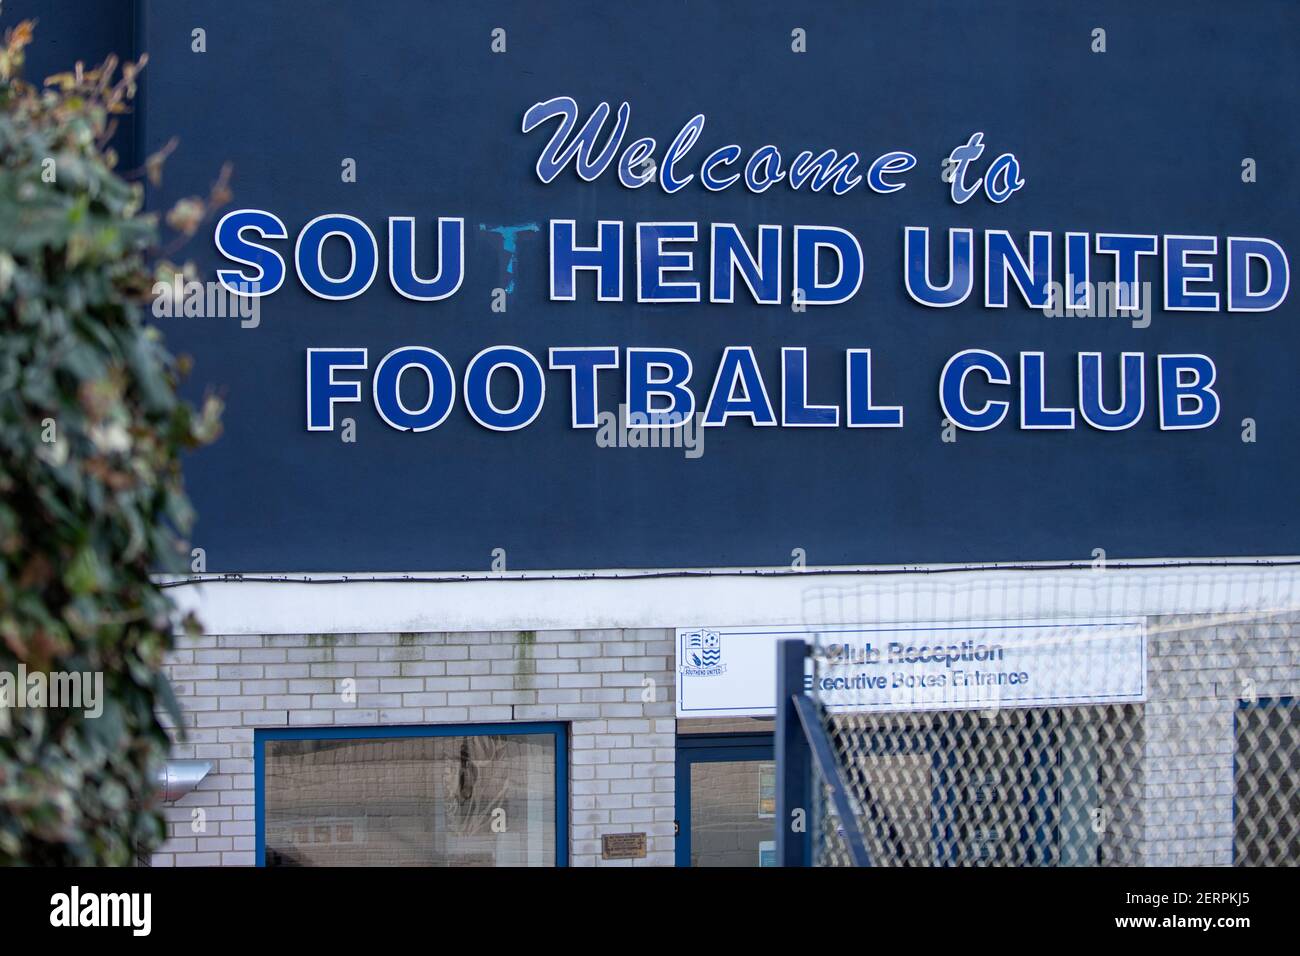 Roots Hall, Southend United Football Club. Stockfoto